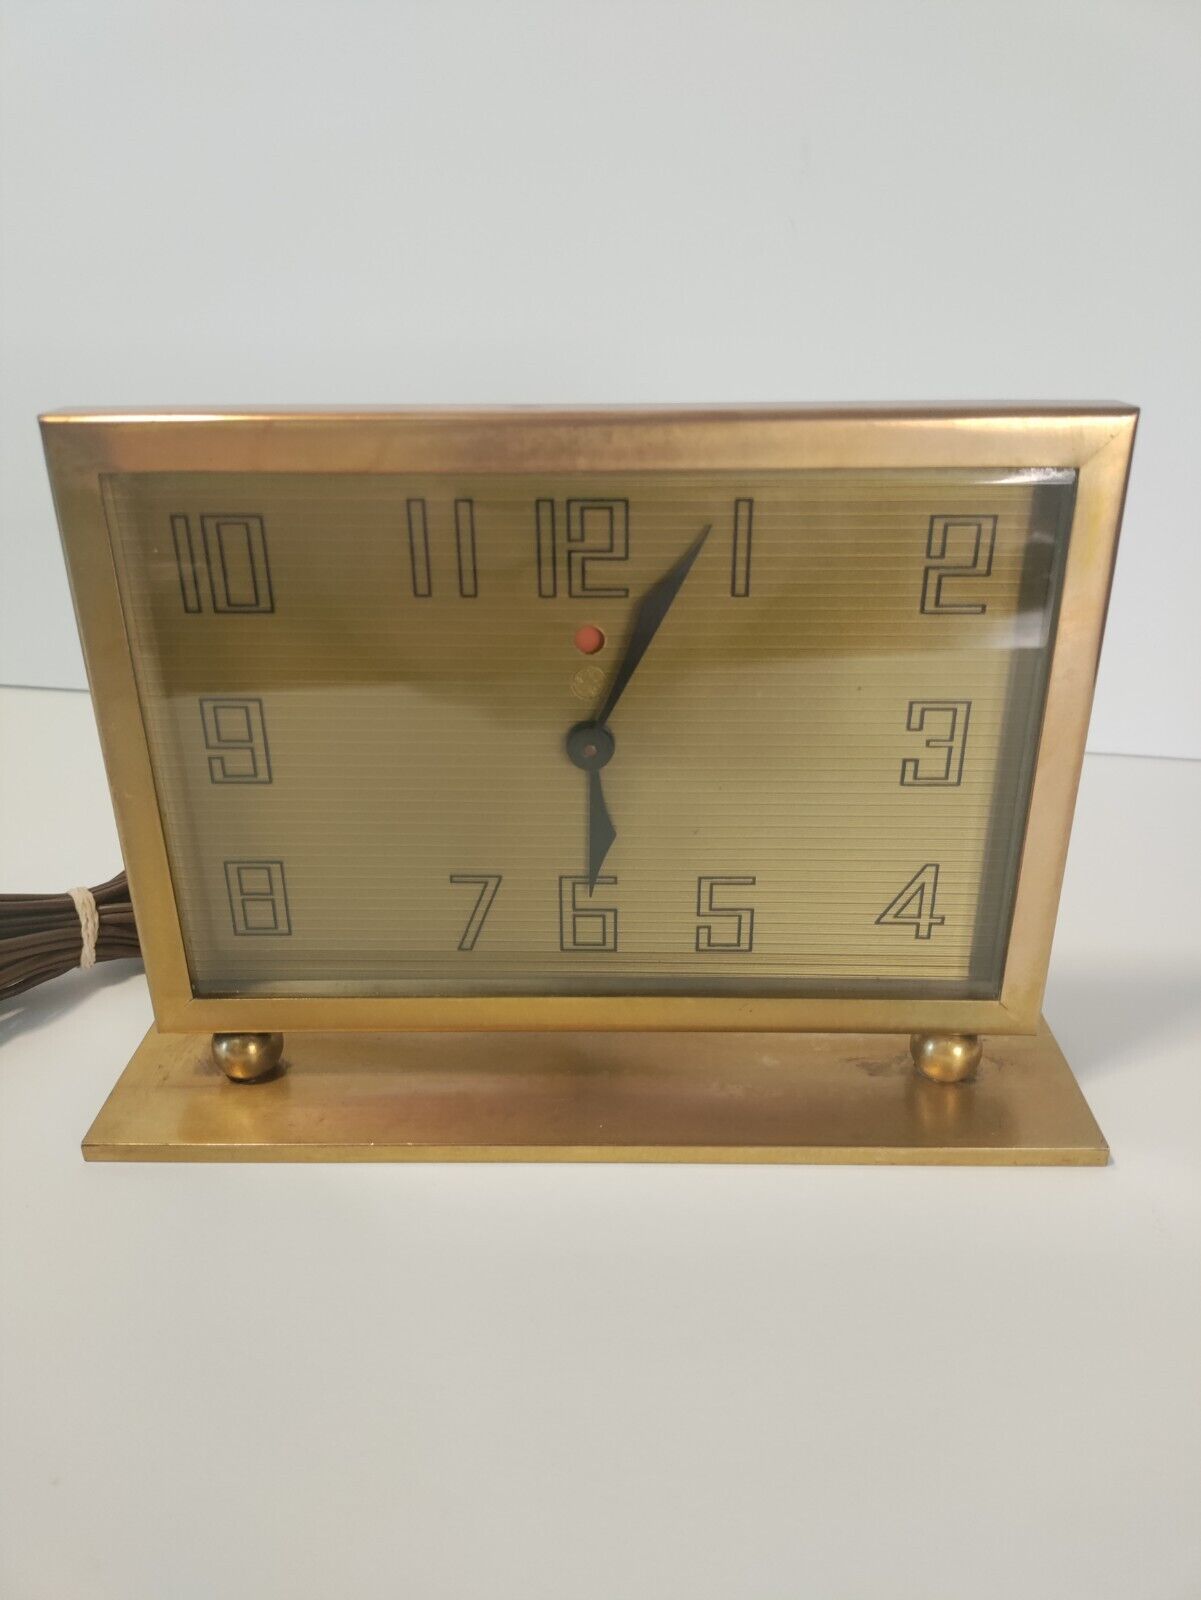 1930s General Electric VTG Art Deco electric table, desk clock Solid Brass Heavy